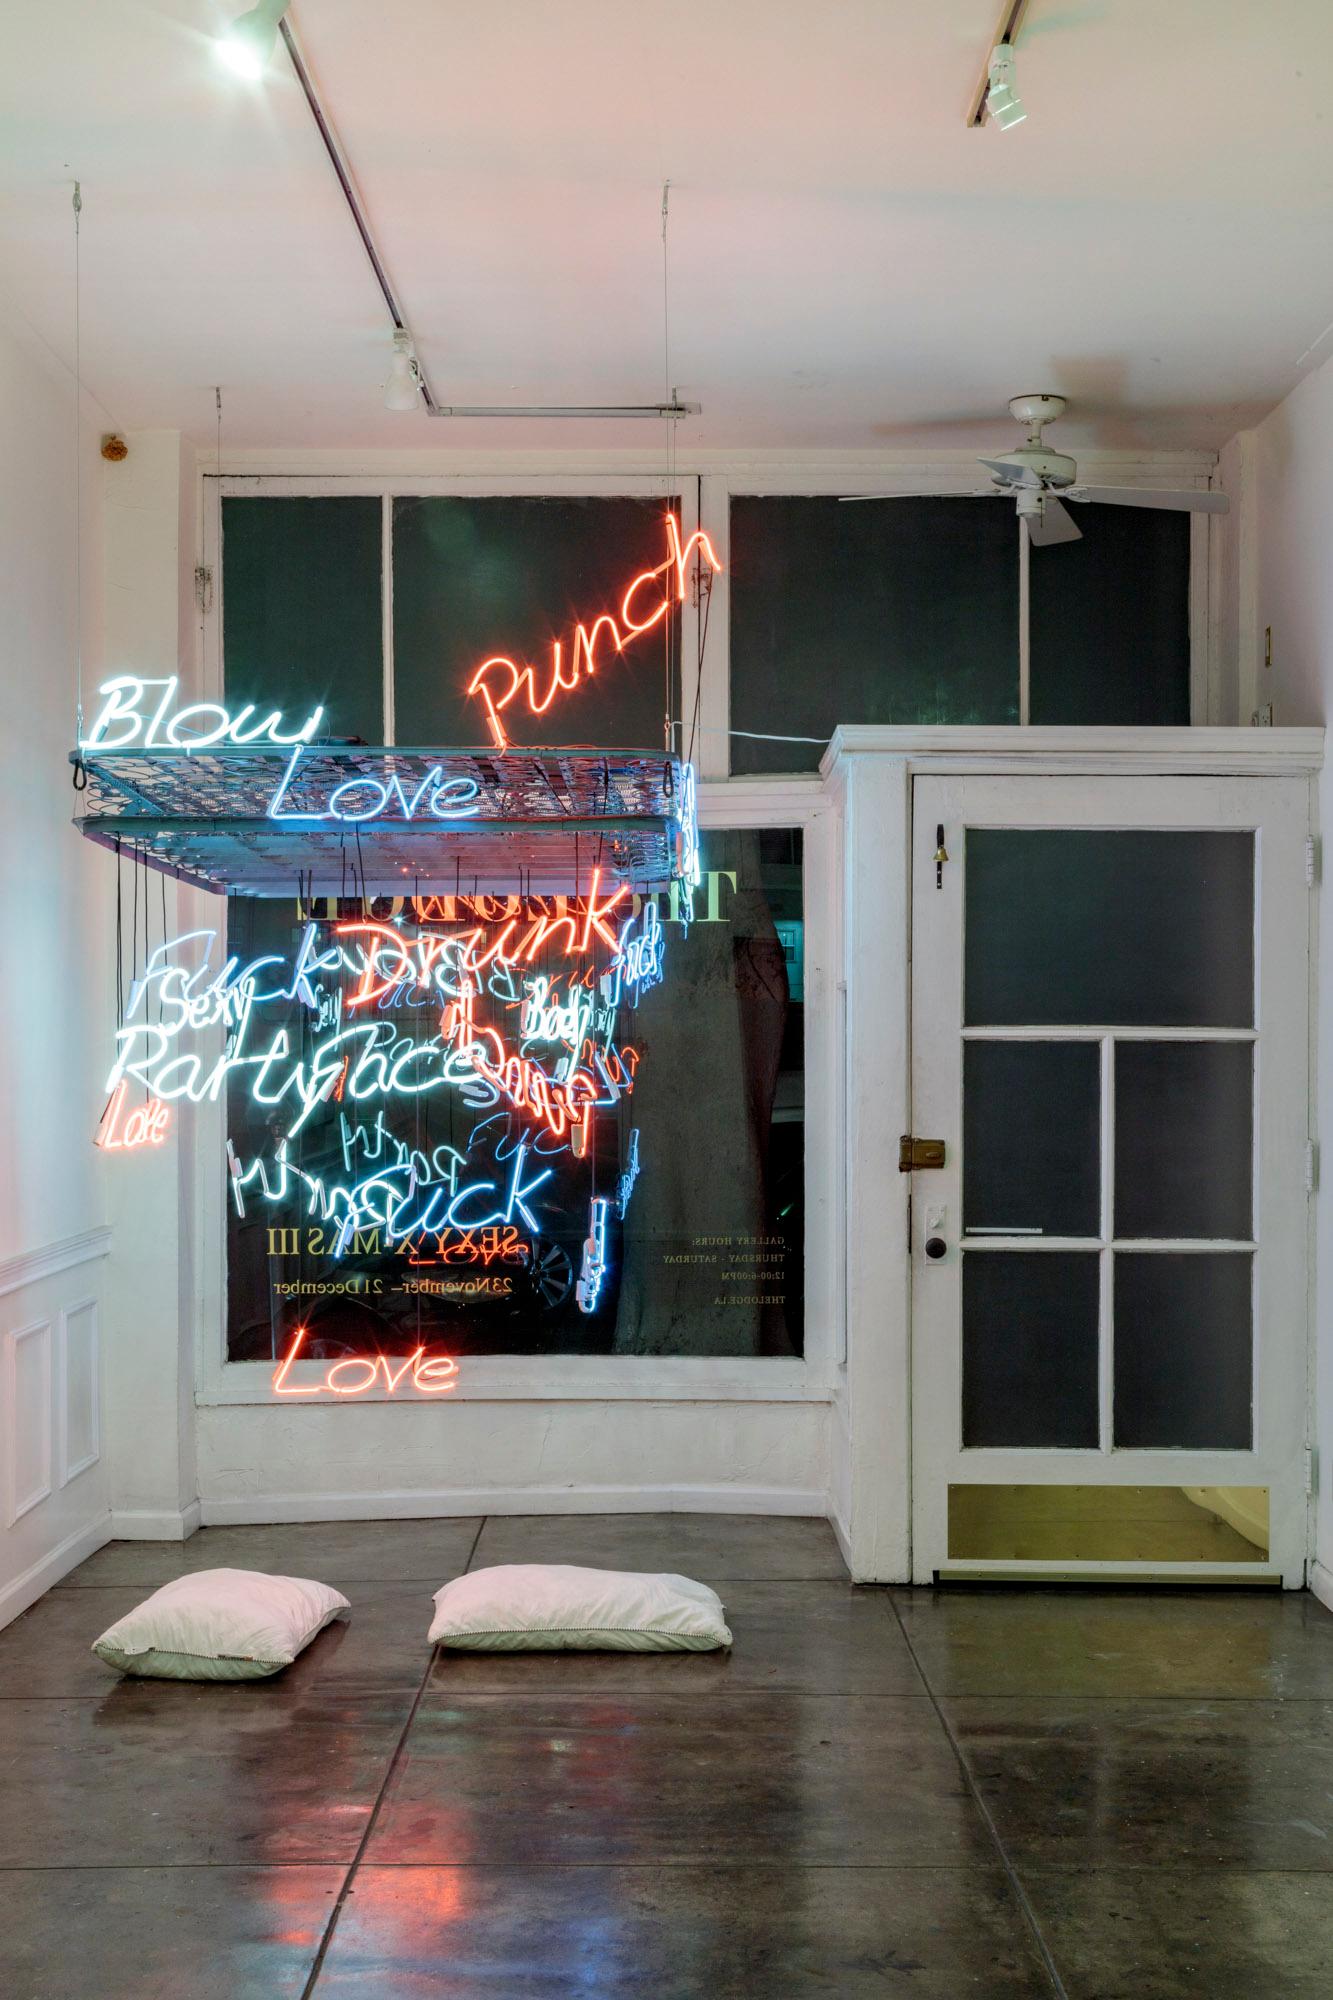 This is the center piece to draw attention! With is neon lights and hanging mattress frame Carl brings his vision of love, lust, and relationships full circle. Ideal for a lobby or foyer.
Hopgood had his two debut solo exhibitions Arrivals,